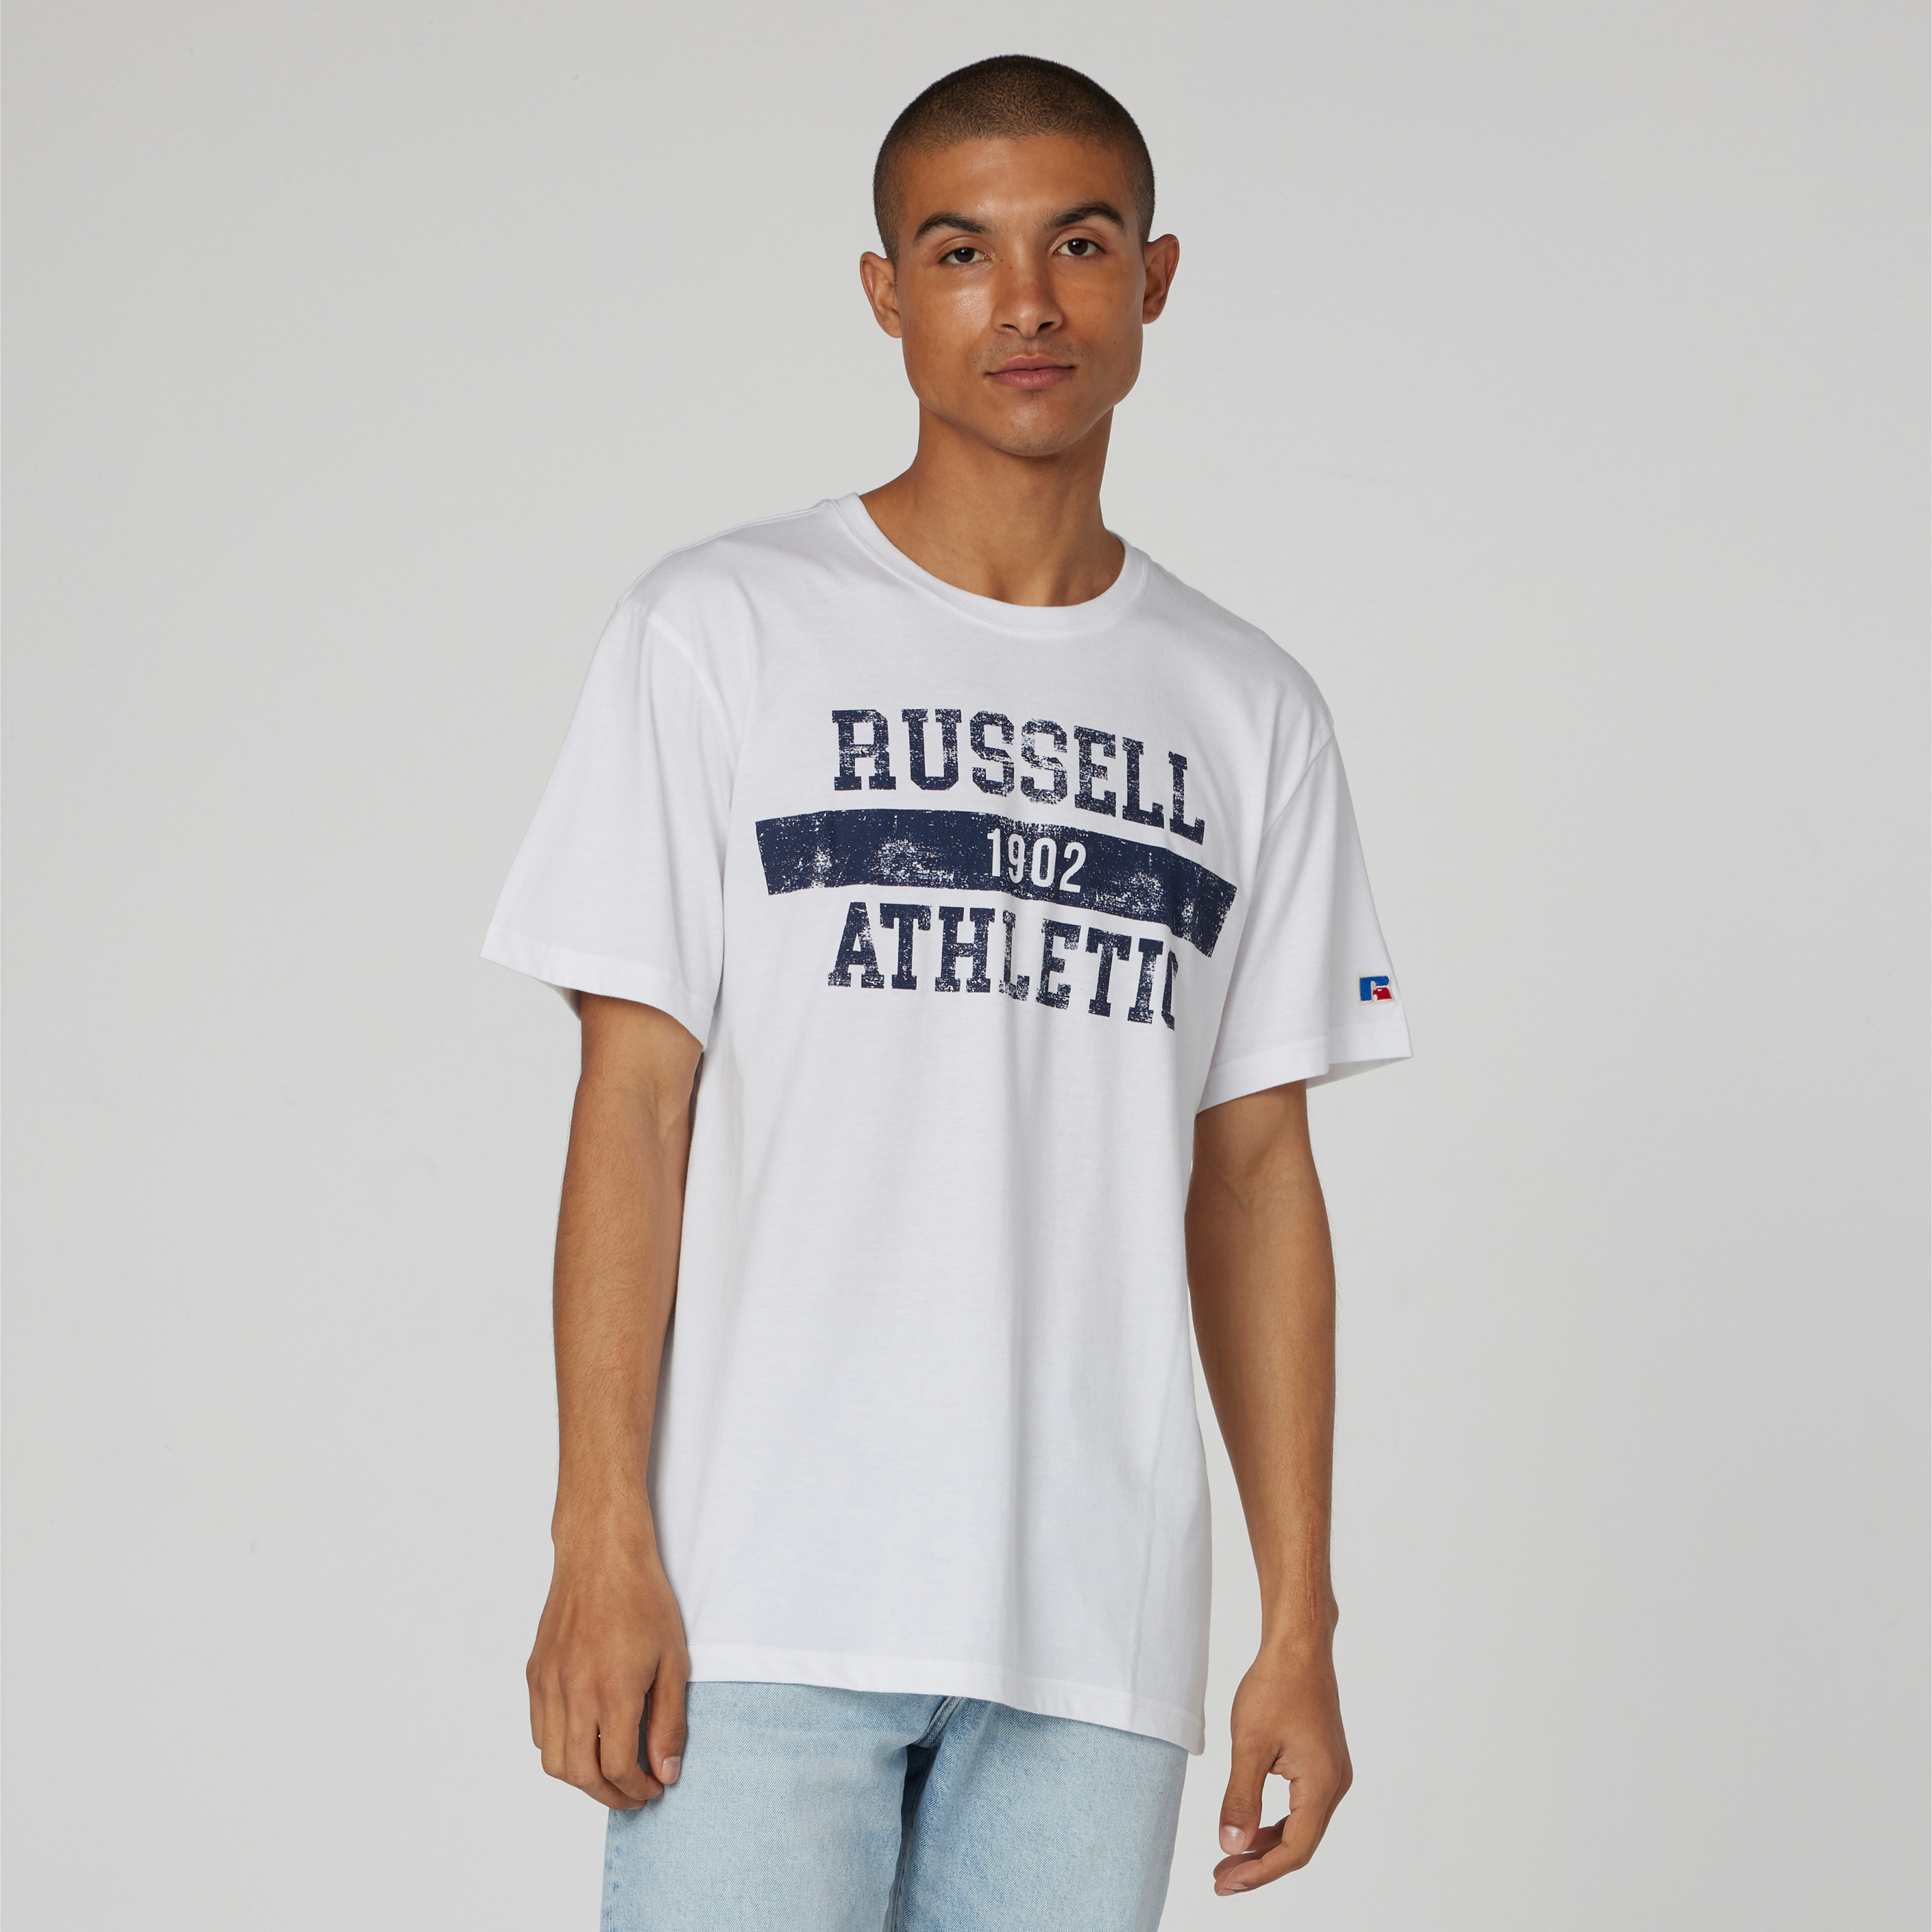 Russell Athletic Men's Top - Grey - XL